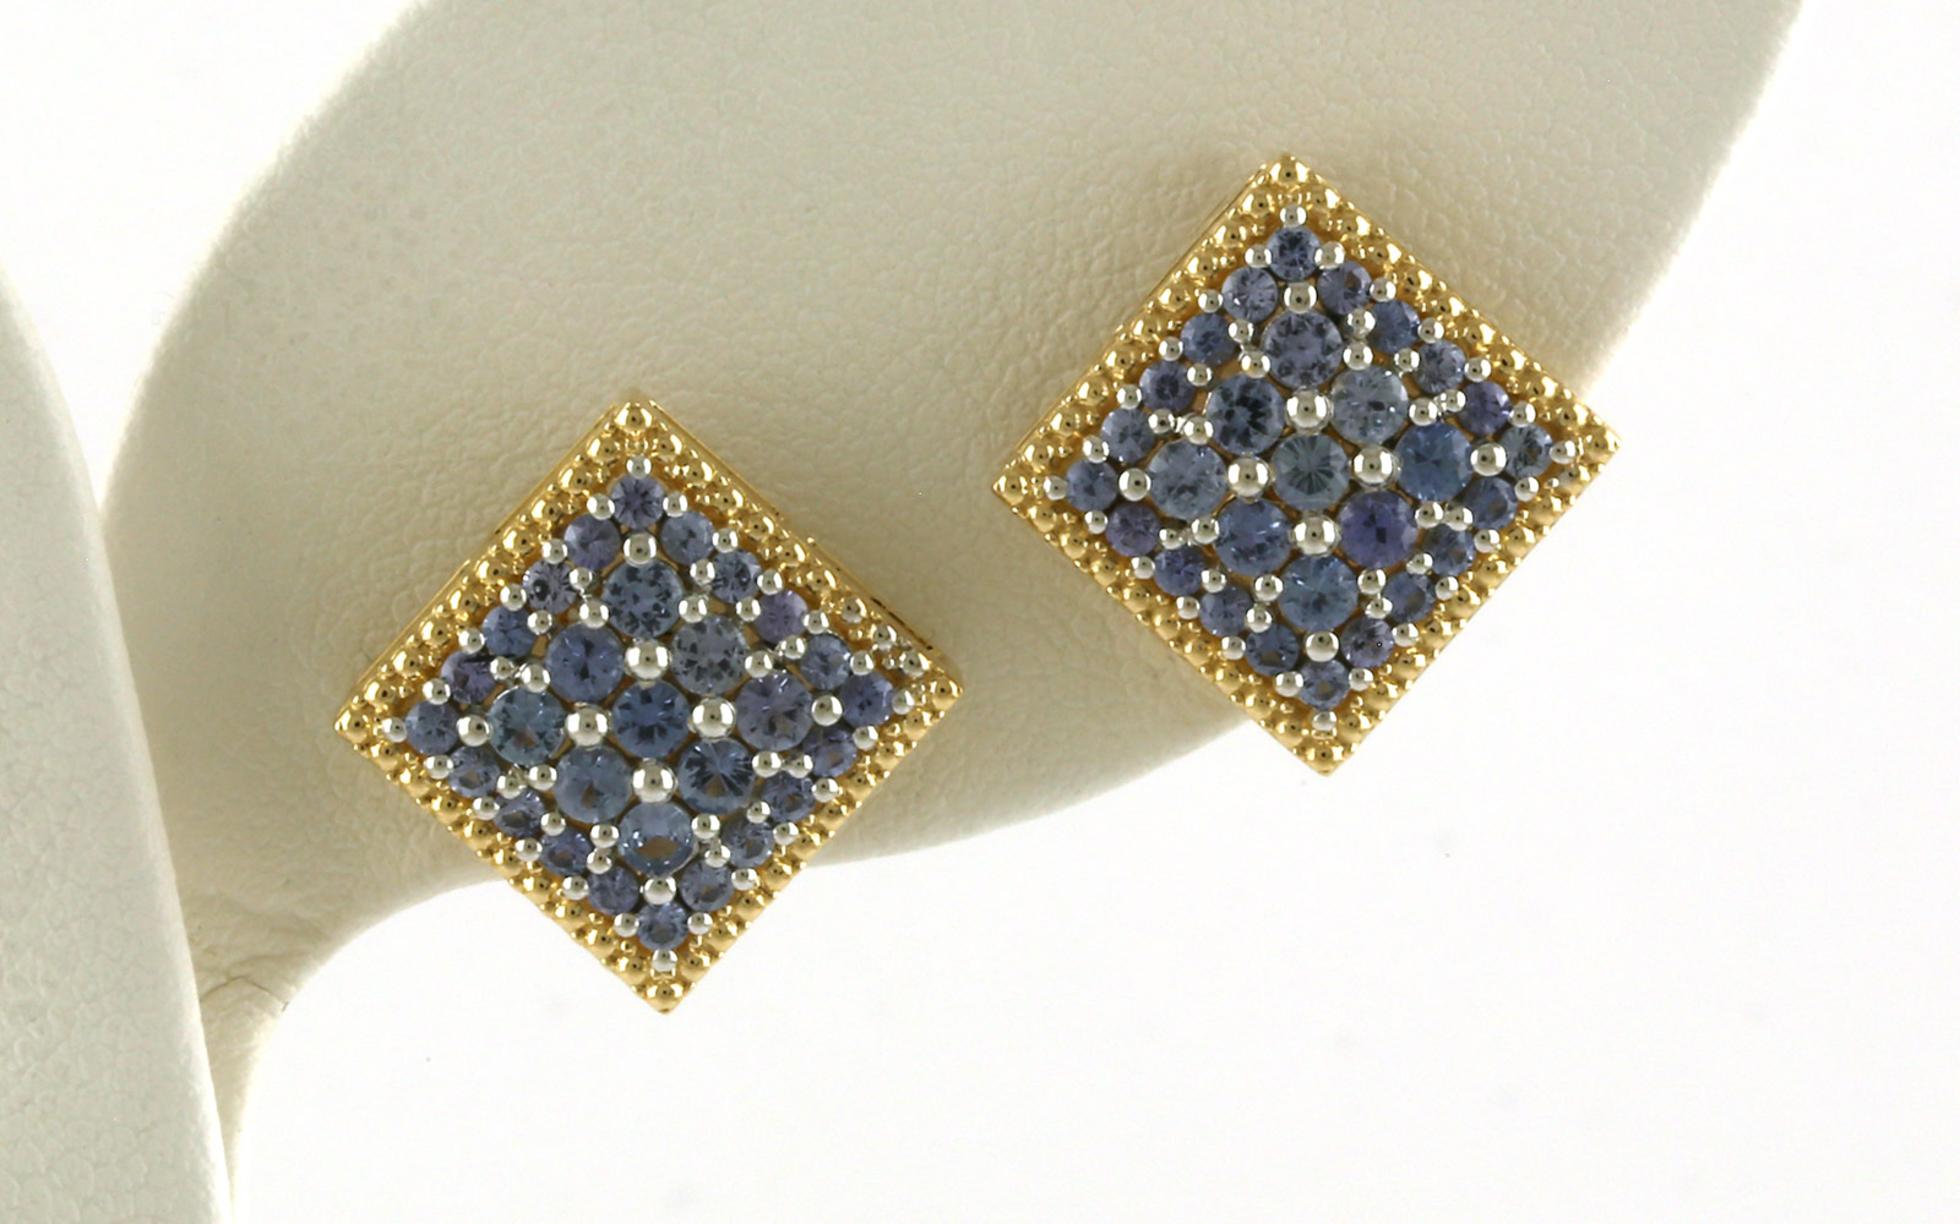 Square Cluster Montana Yogo Sapphire Stud Earrings with Beaded Edge in Yellow Gold (1.24cts TWT)